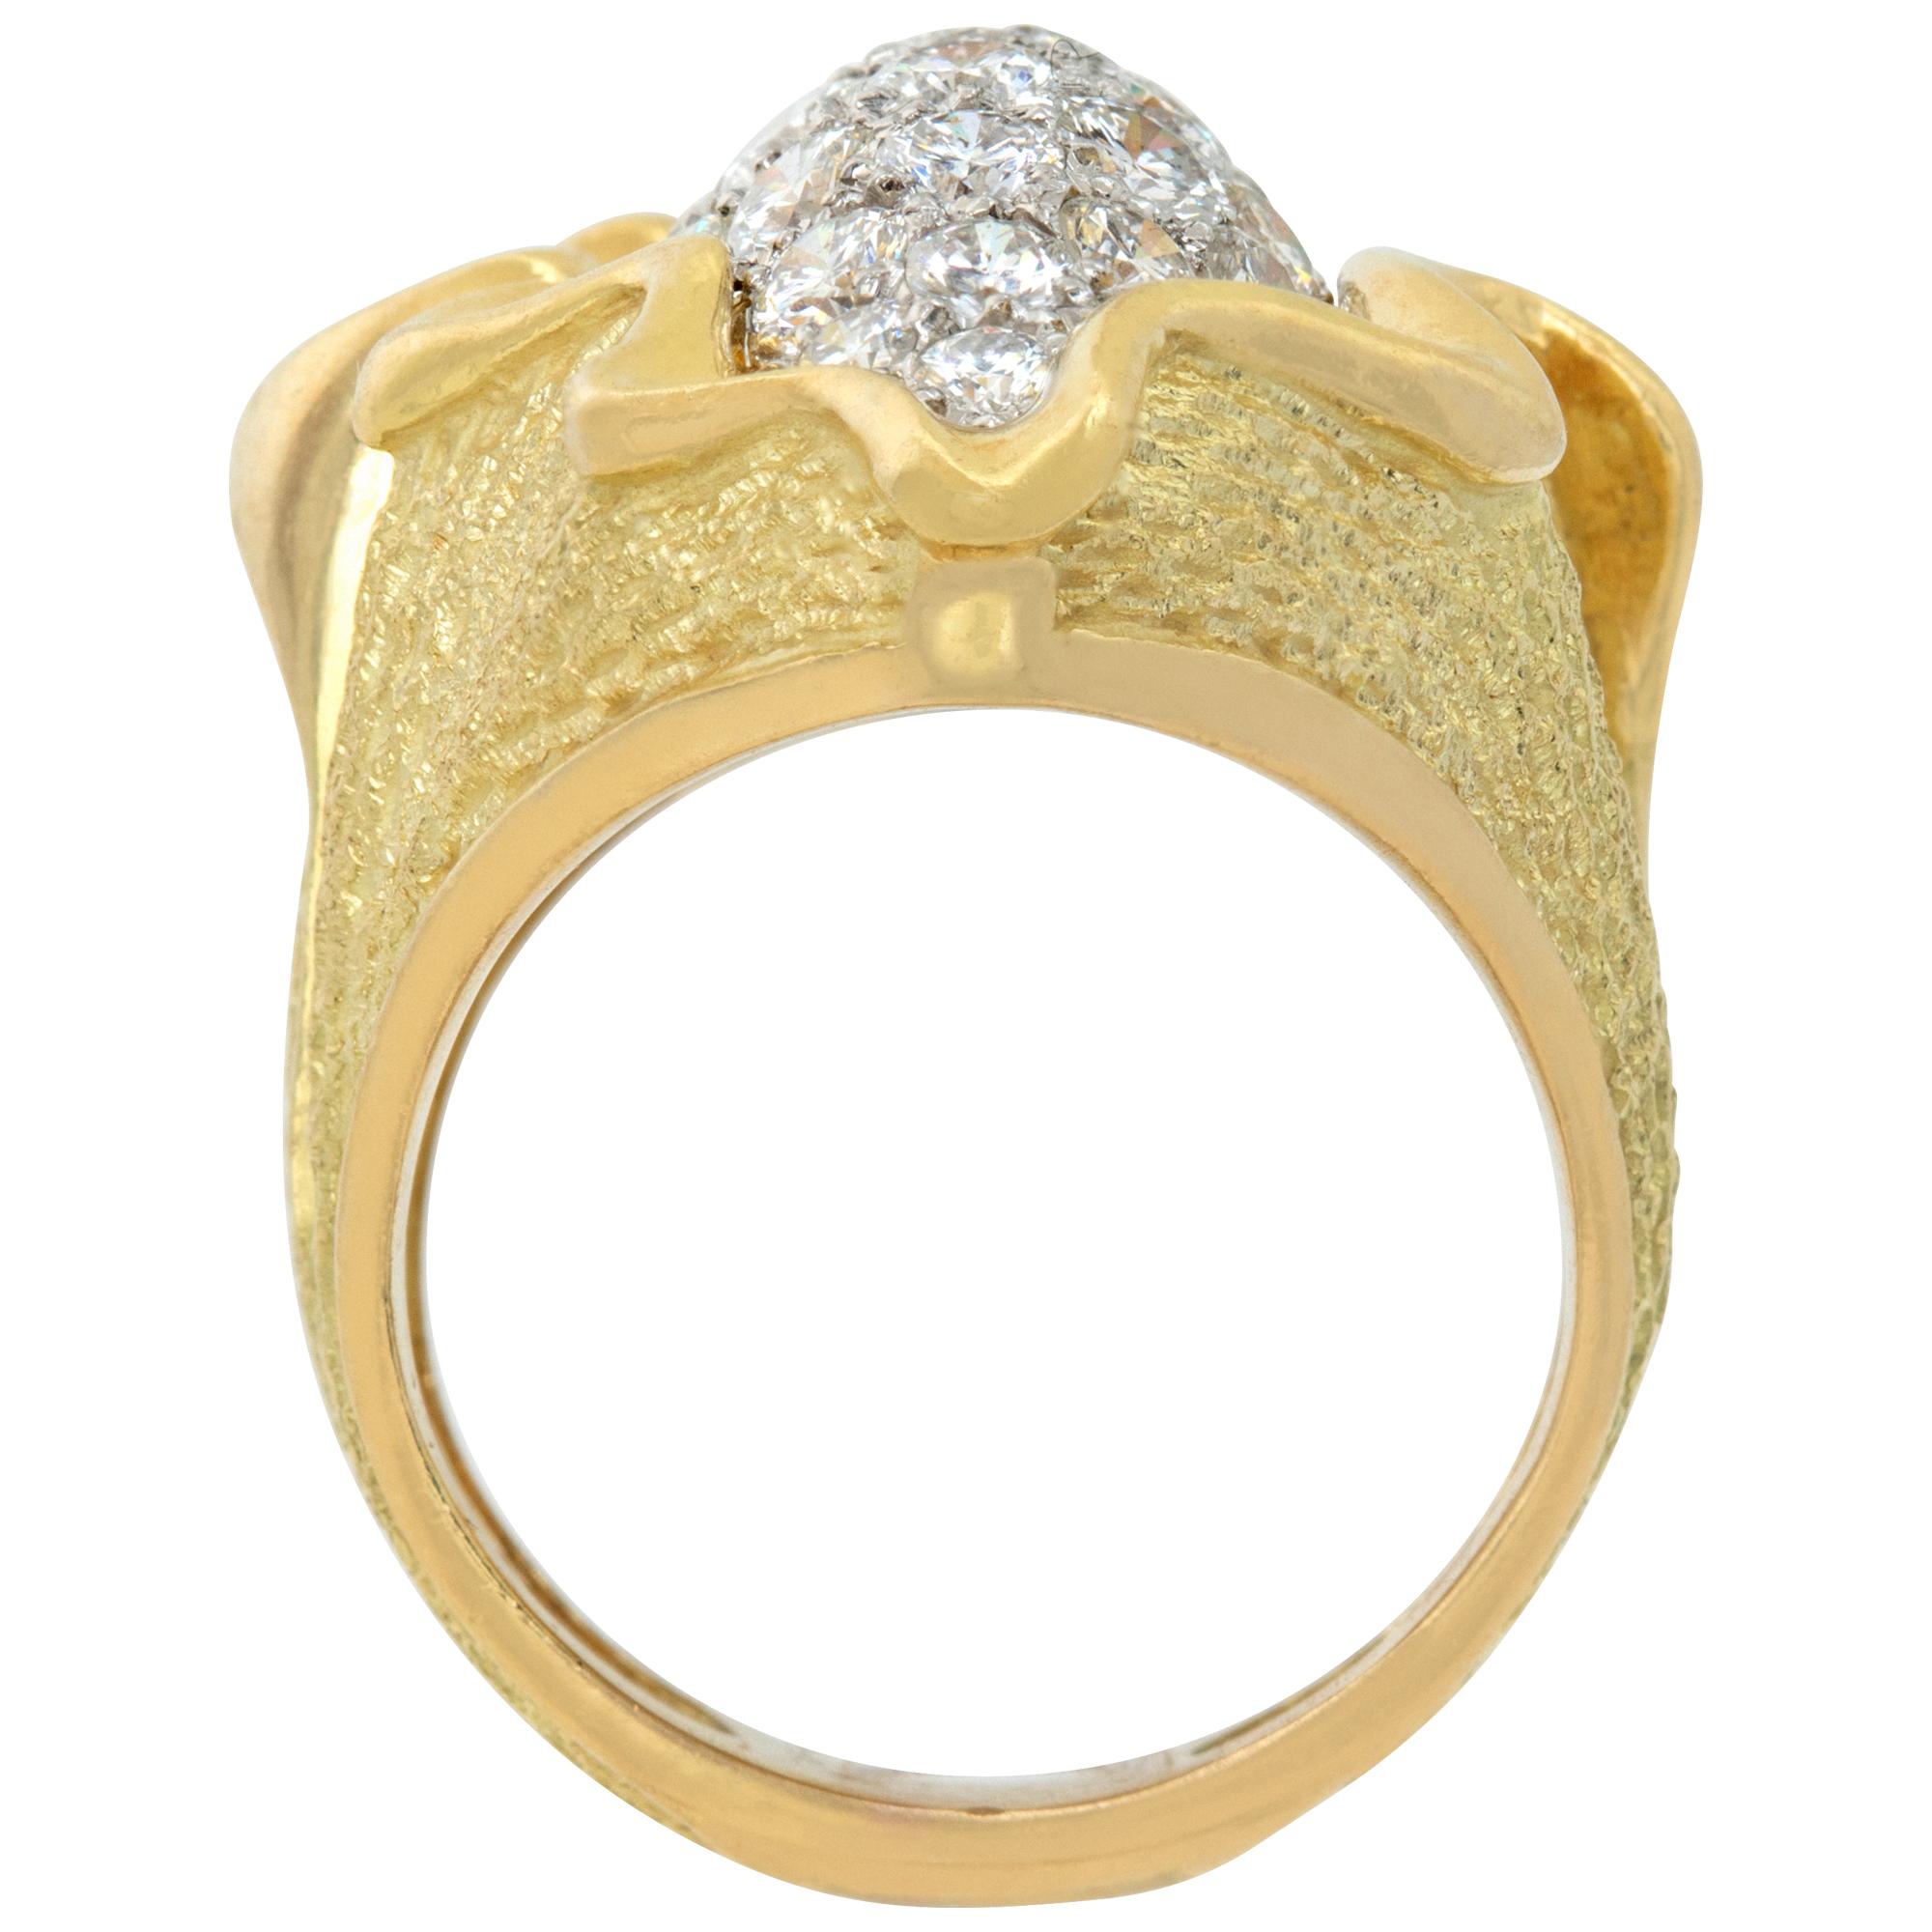 Women's Wave ring with round brilliant cut diamonds set in yellow and white gold. For Sale